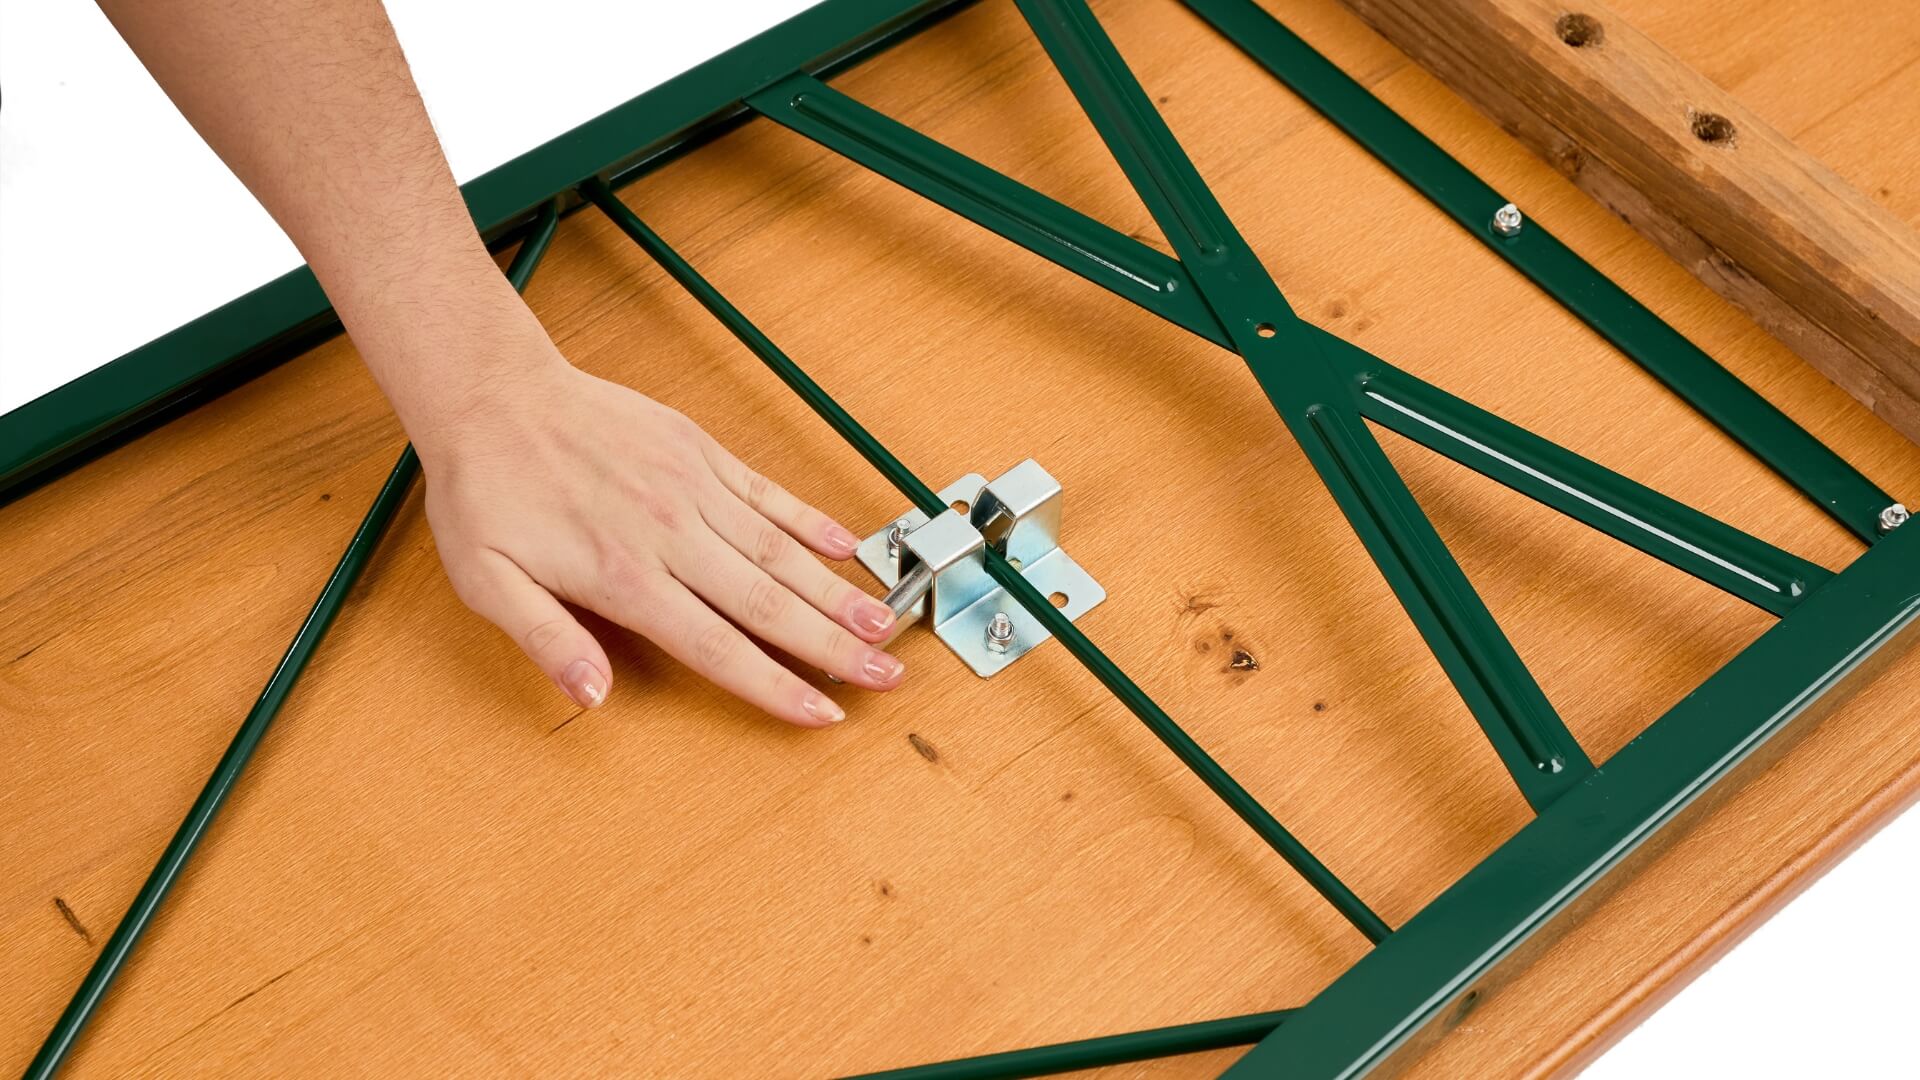 A hand pushes down the lever of the folding furniture lock to assemble the classic beer garden table set.